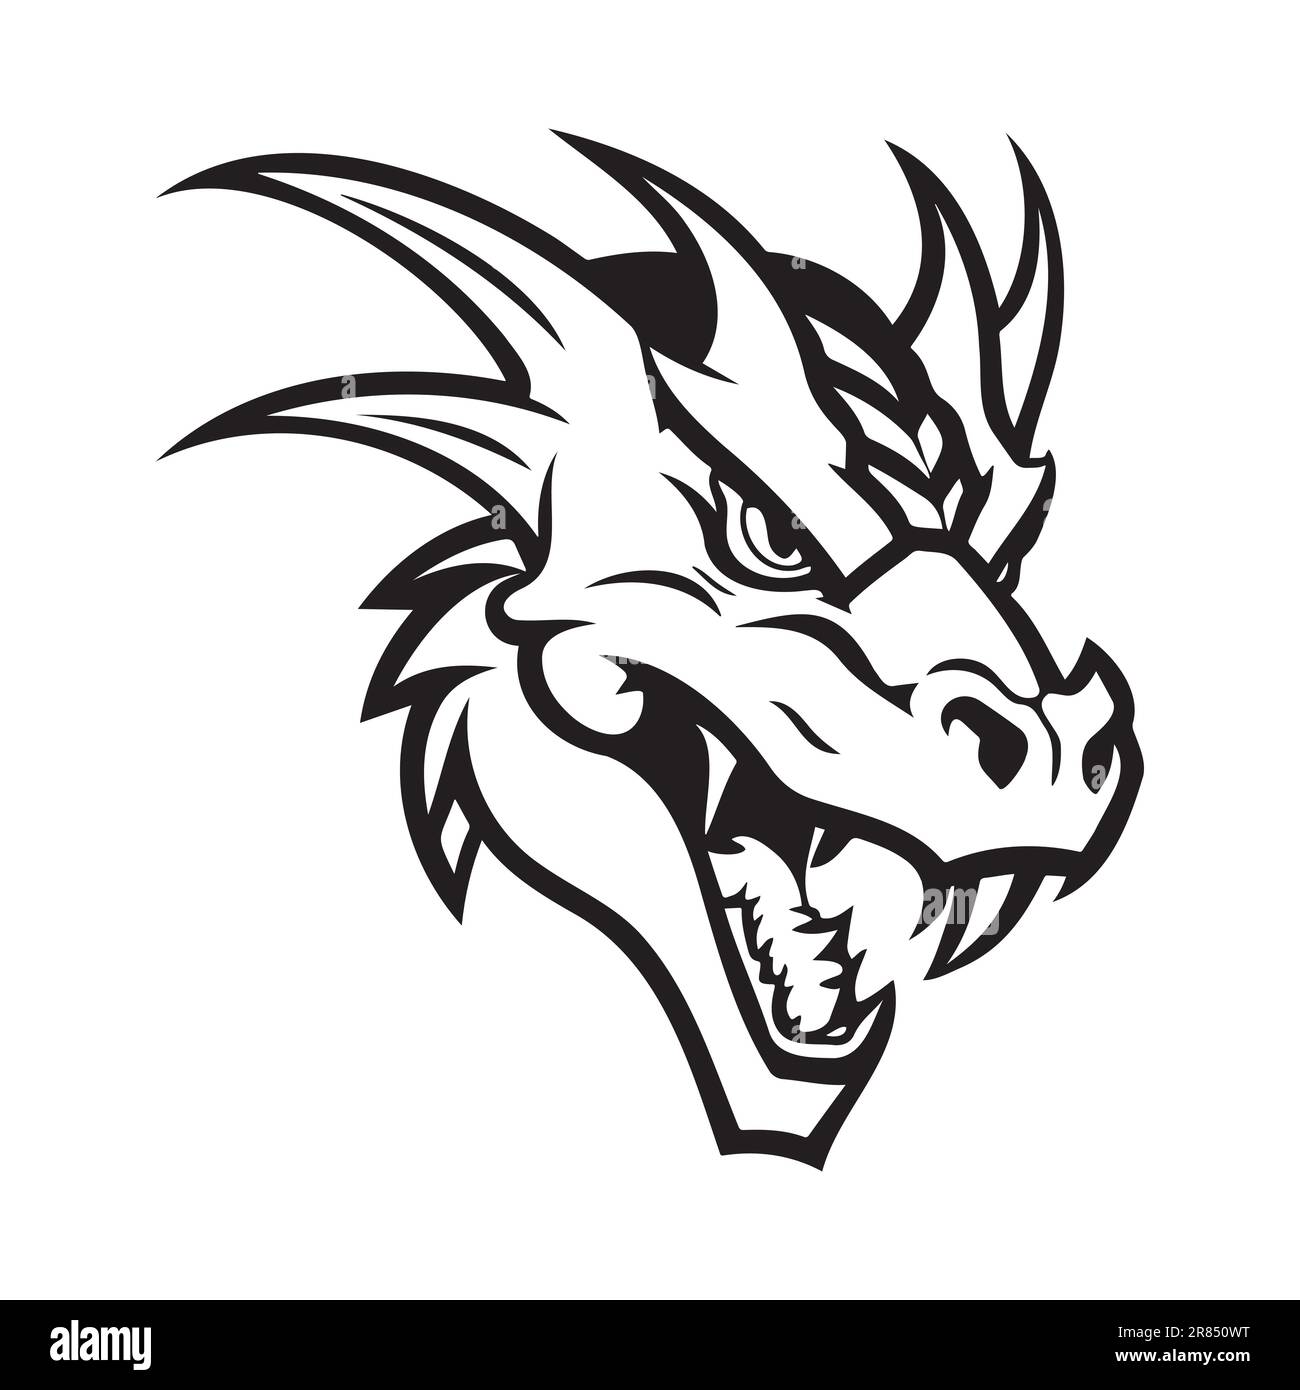 Dragon head black and white vector icon. Template for logo, emblem or ...